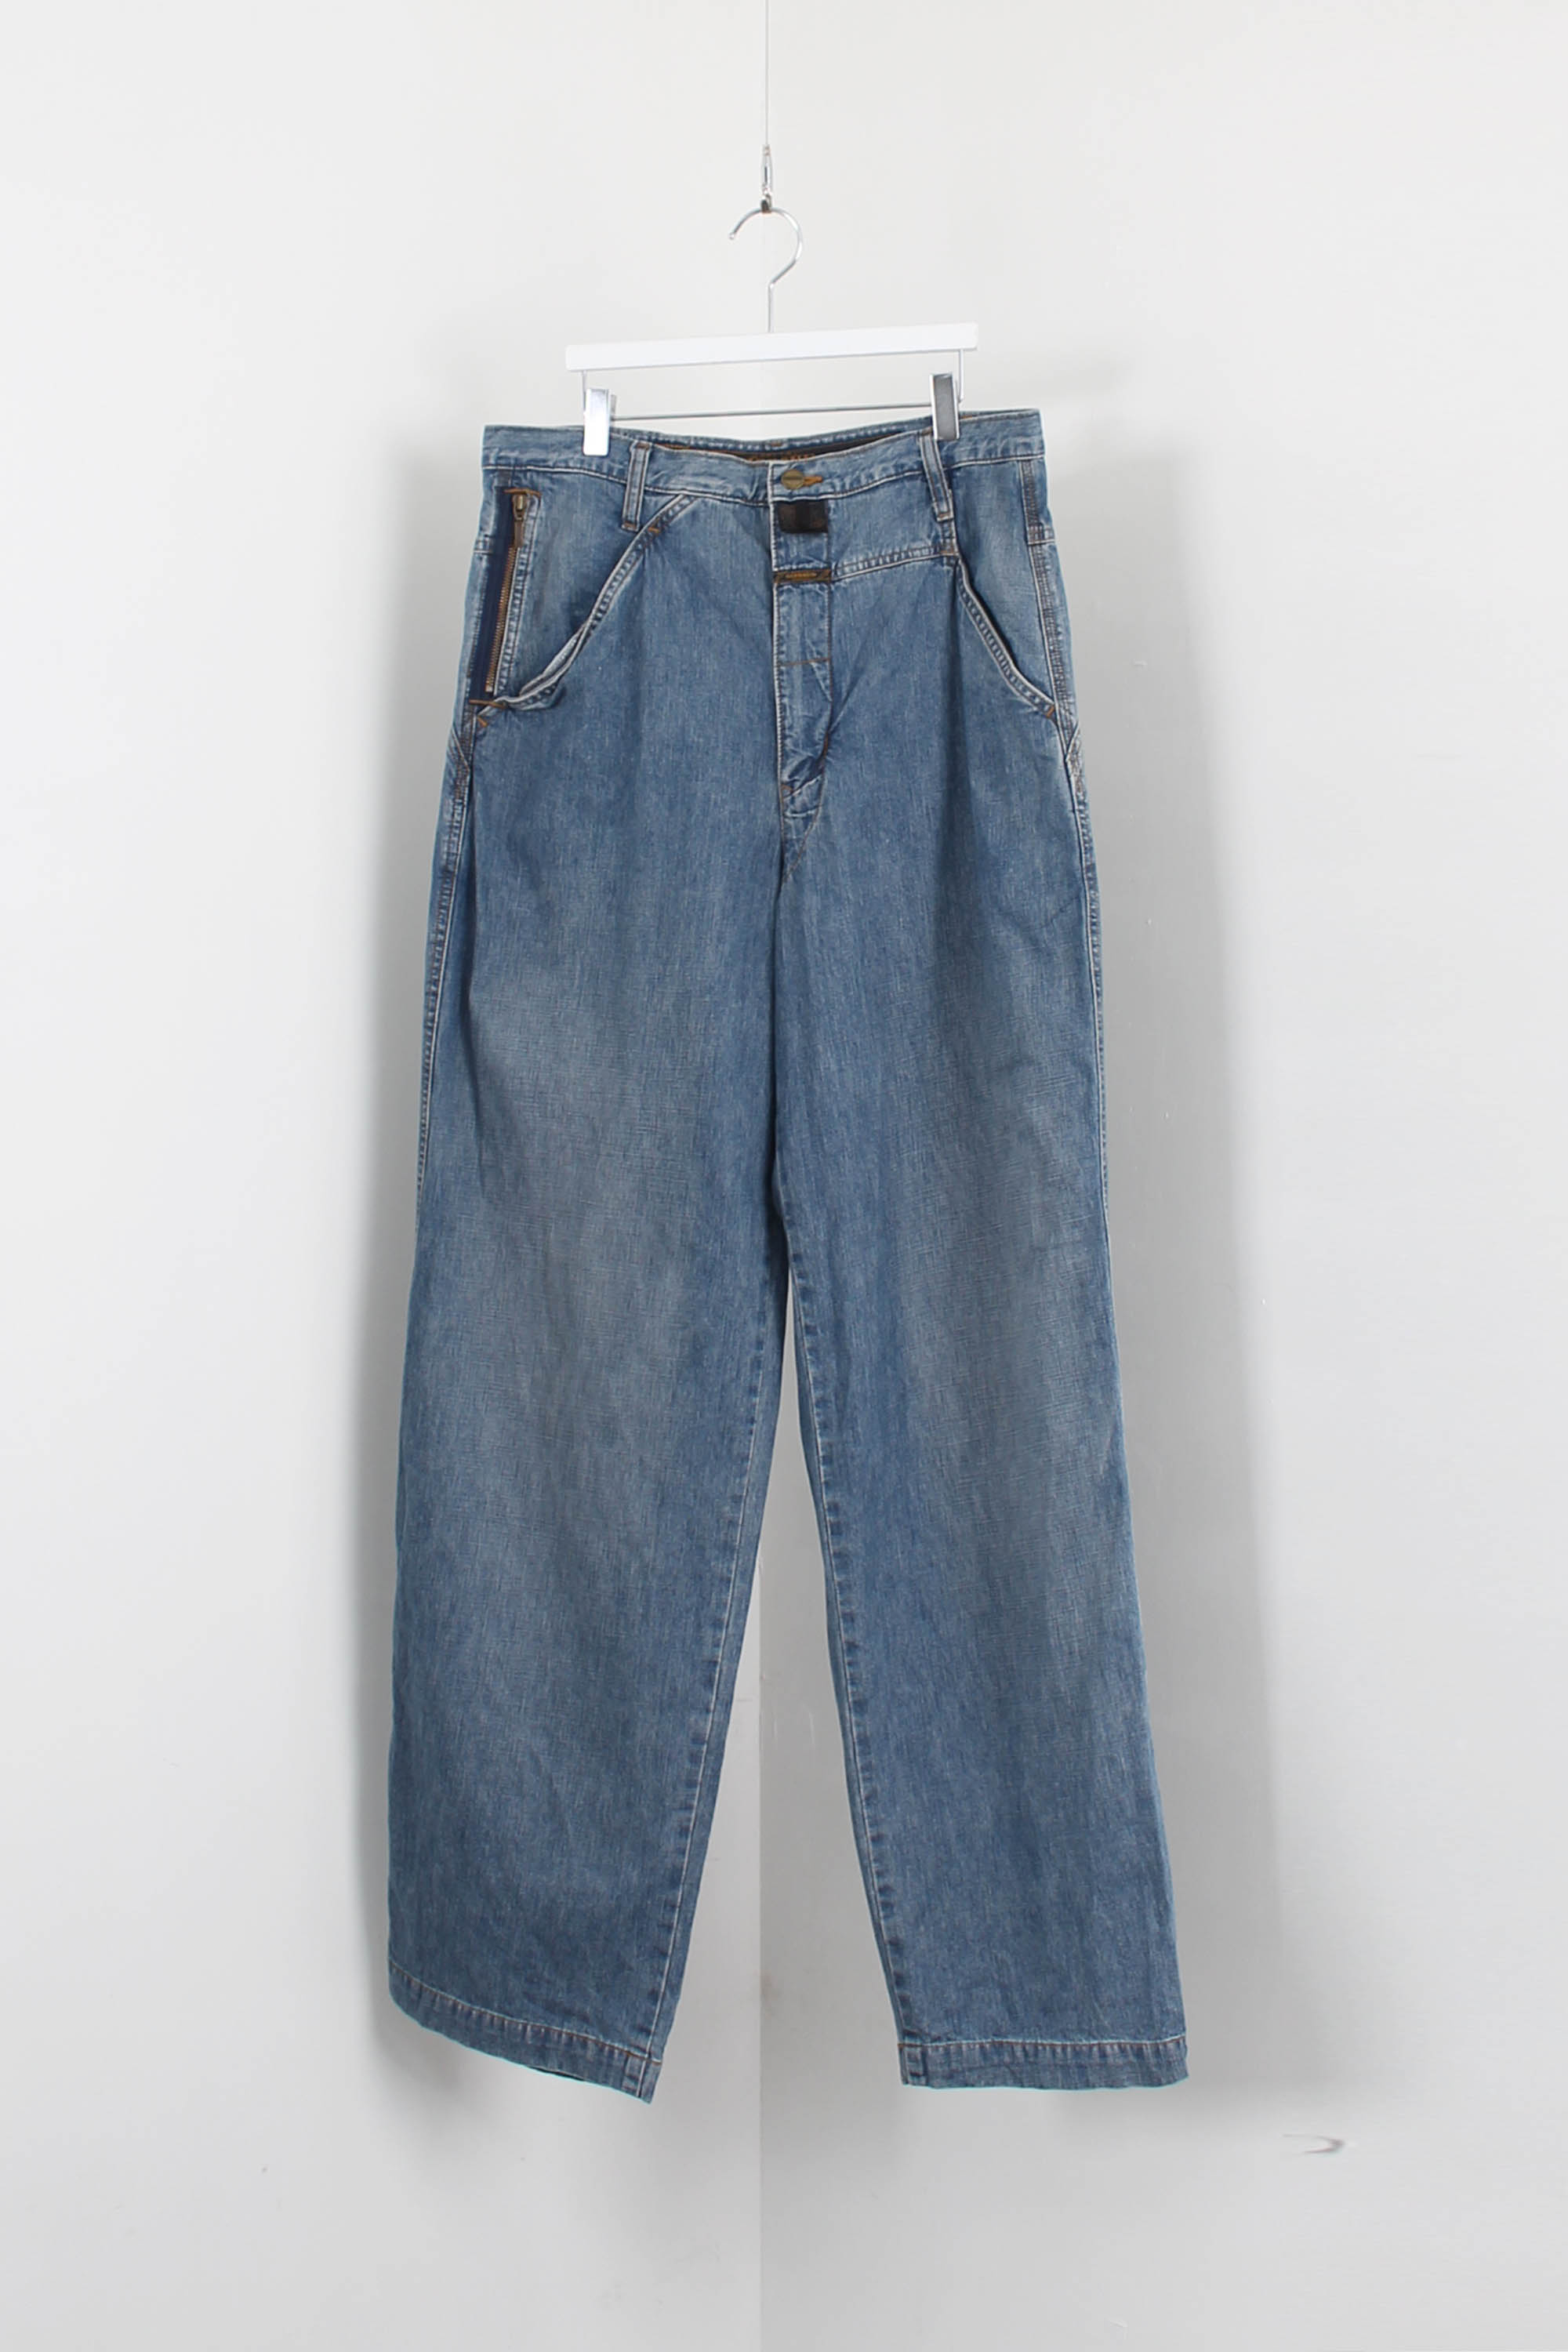 old MARITHE FRANCOIS GIRBAUD washed pants